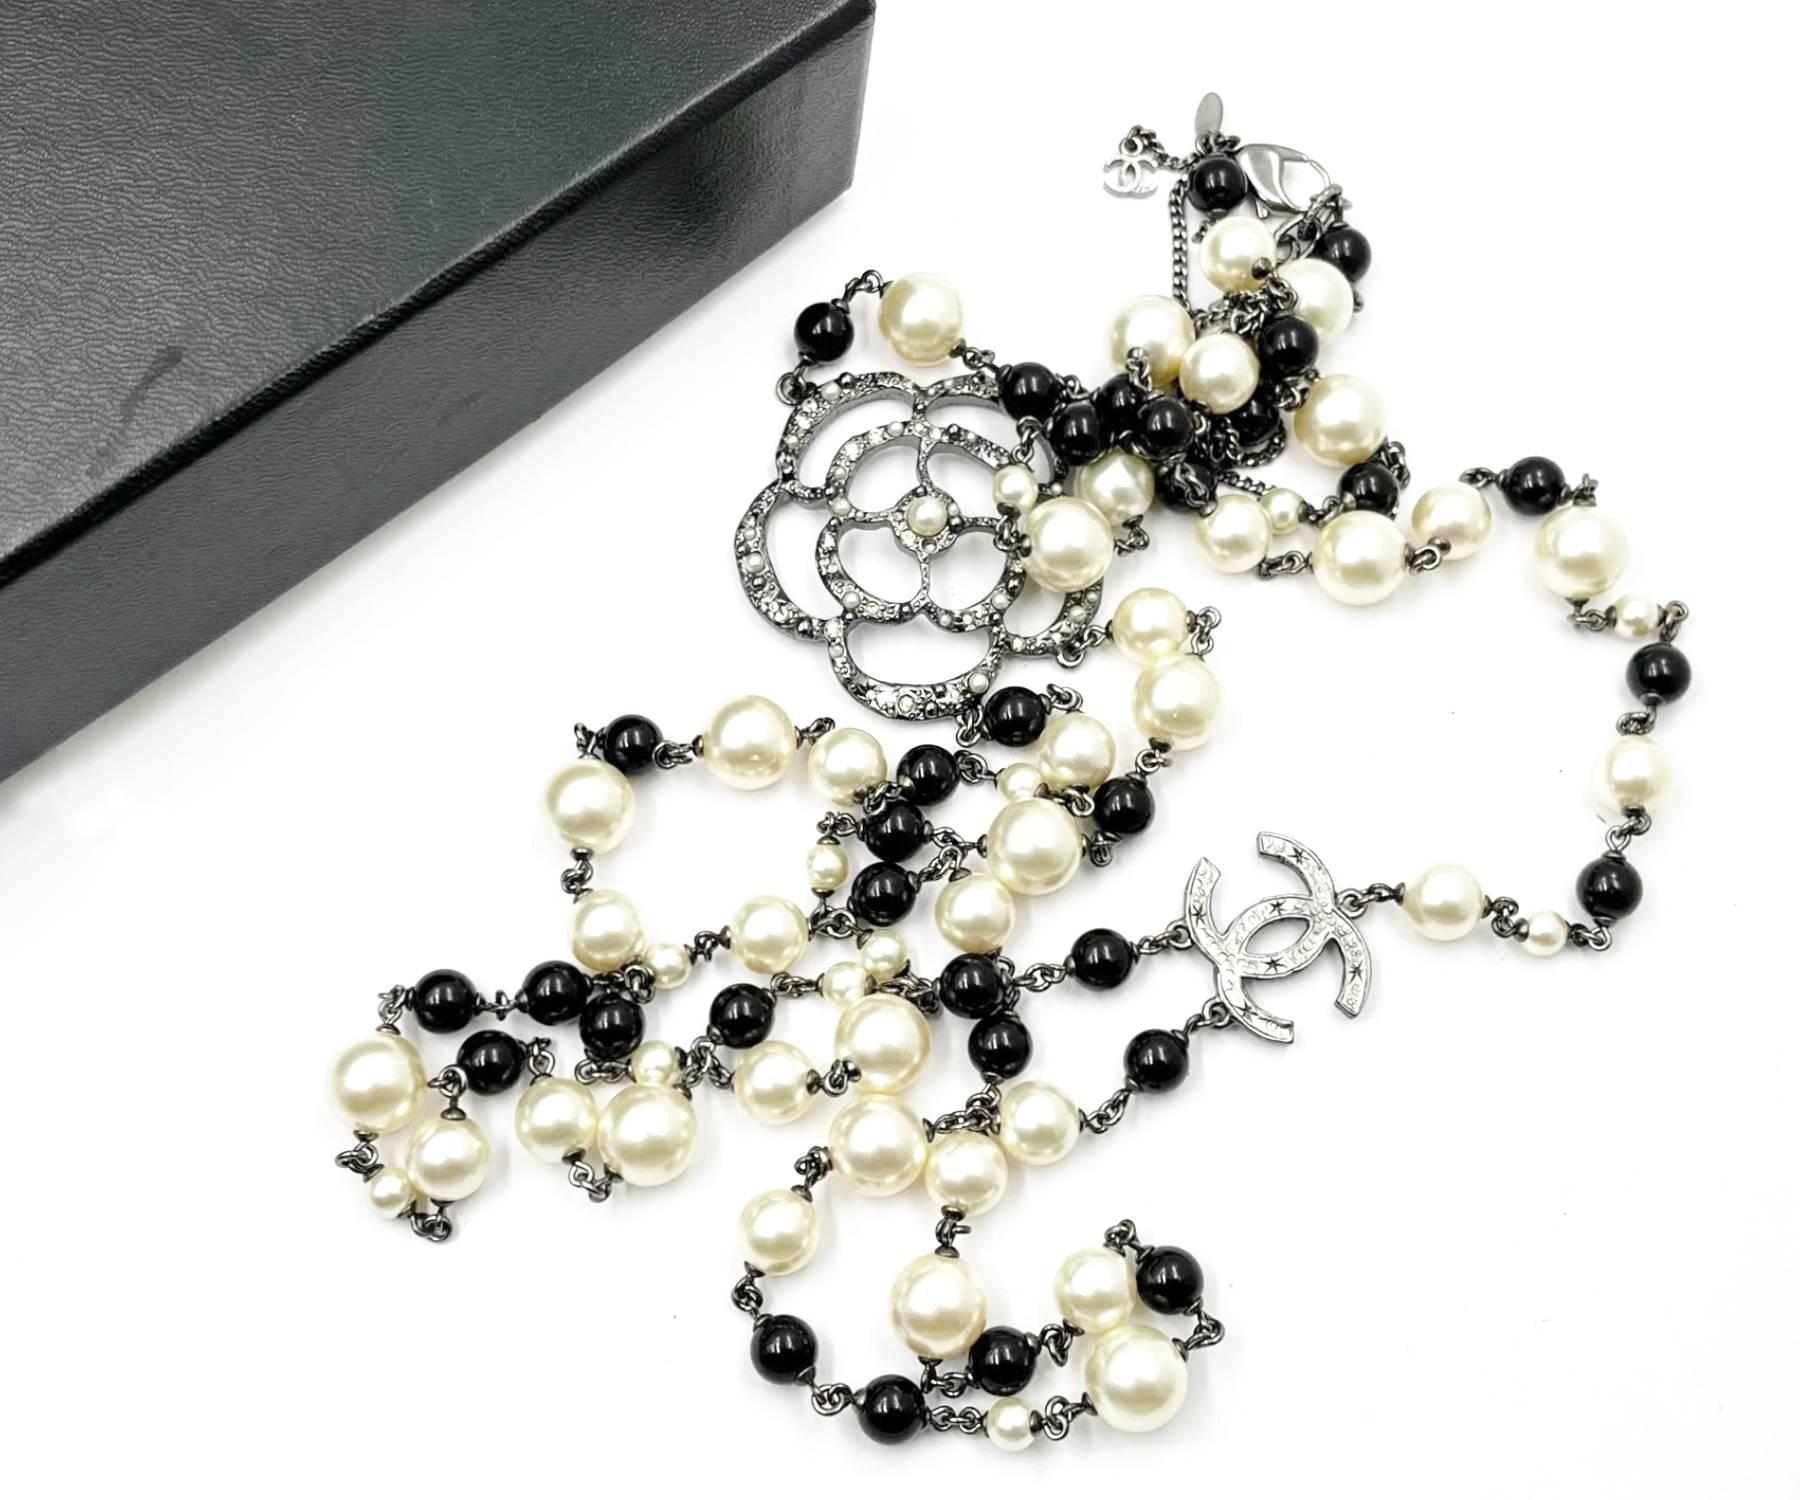 Chanel Gunmetal CC Camellia Pearl Black Beads 2 Strand Long Necklace

*Marked in 13
*Made in France
*Comes with the original box

-Approximately 46″ long
-Great for any outfit
-Very elegant and beautiful
-An excellent present for Chanel